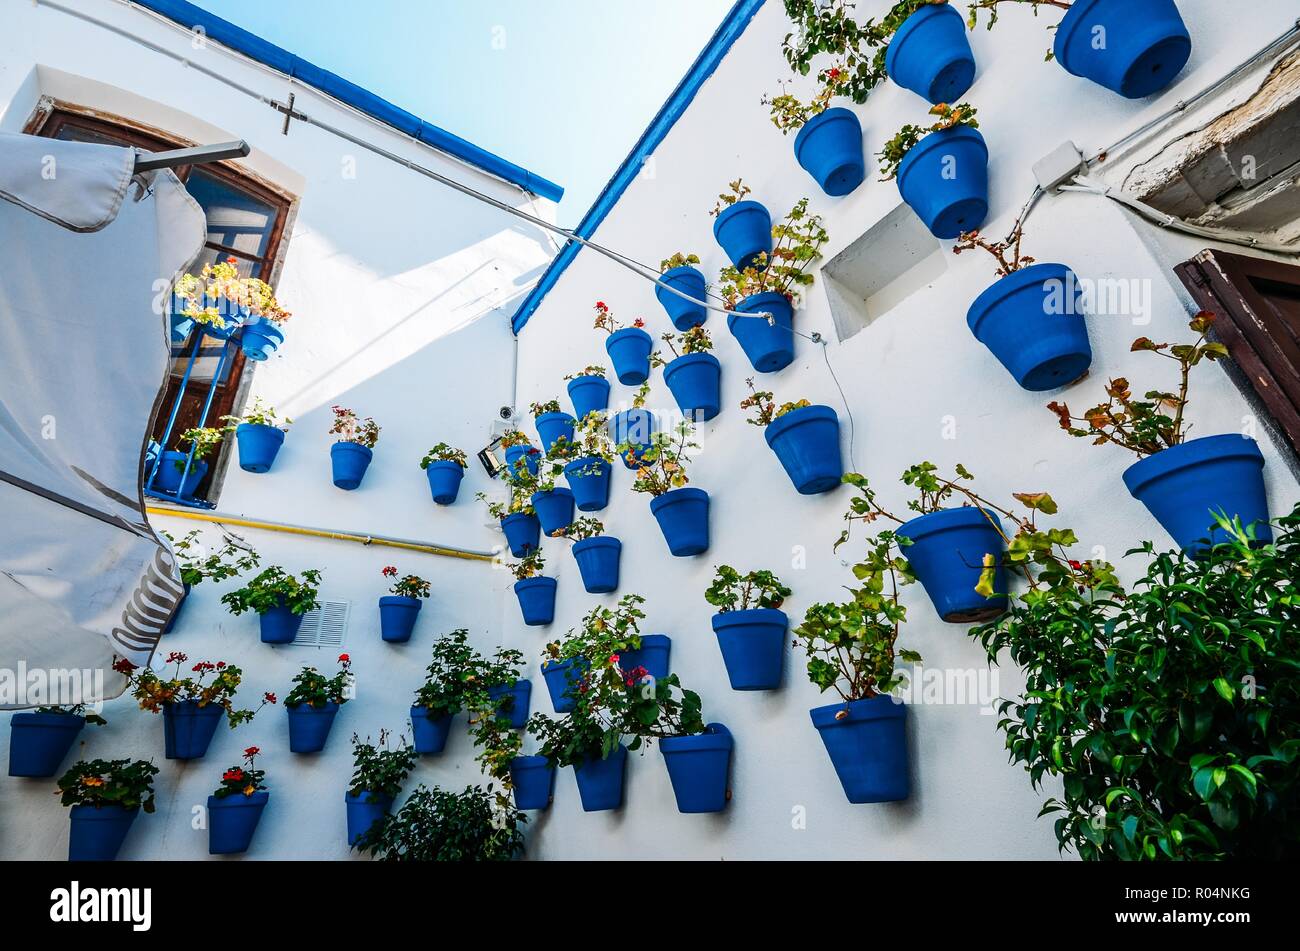 Traditional blue pots on a whitewashed wall in Cordoba, Andalucia, Spain, Europe Stock Photo